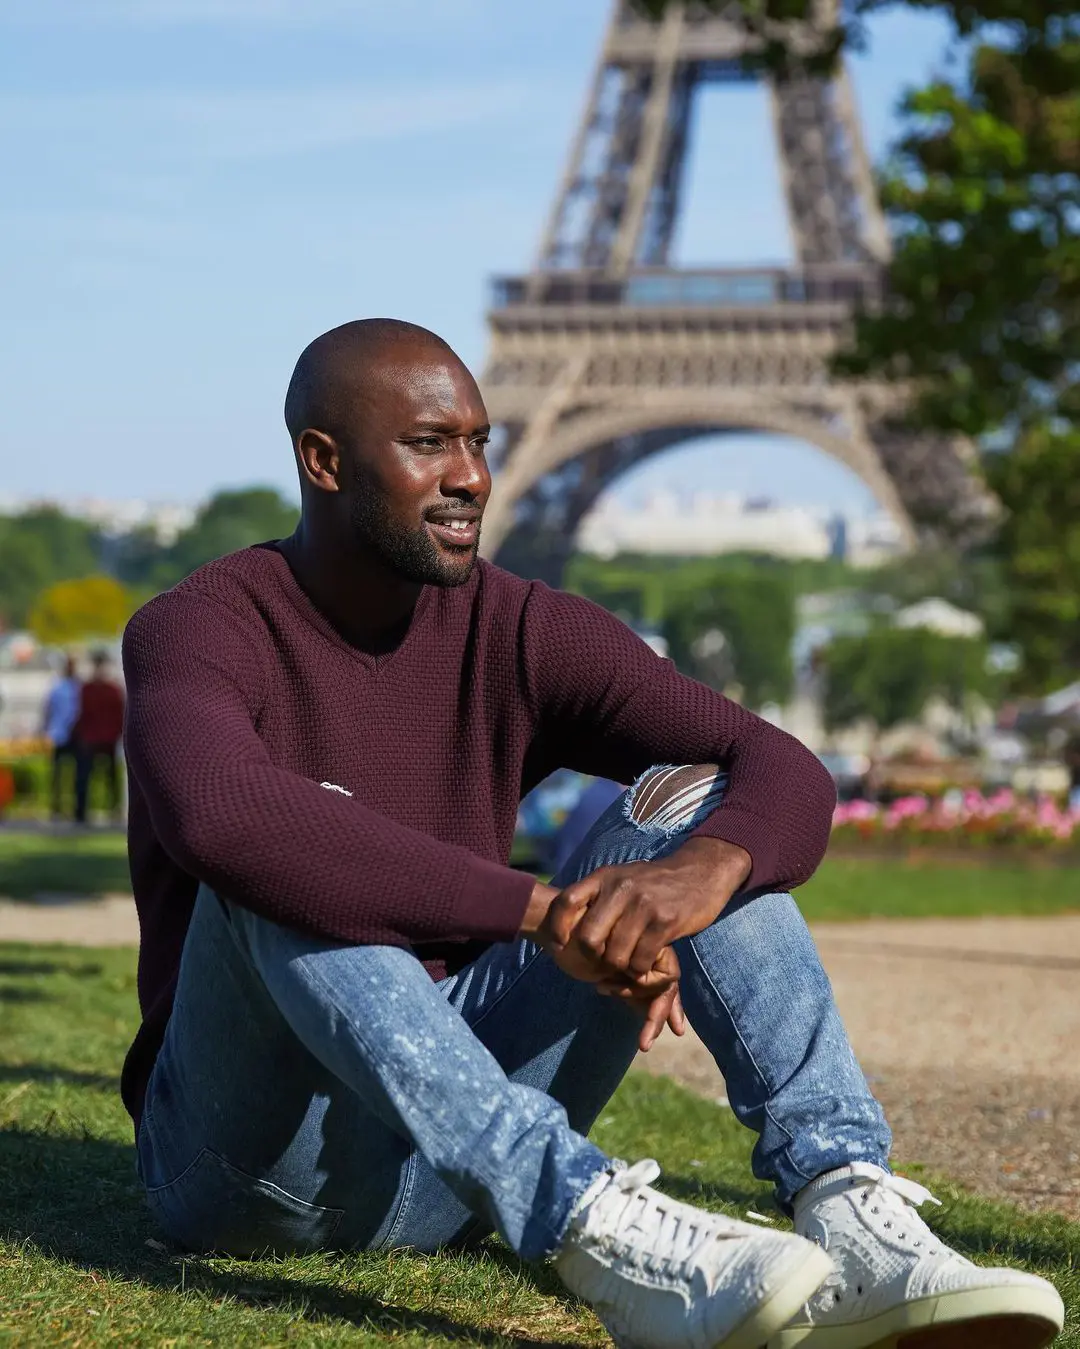 Inspite of being one of the most earning player, Carlton Cole was once declared bankrupt in 2018.